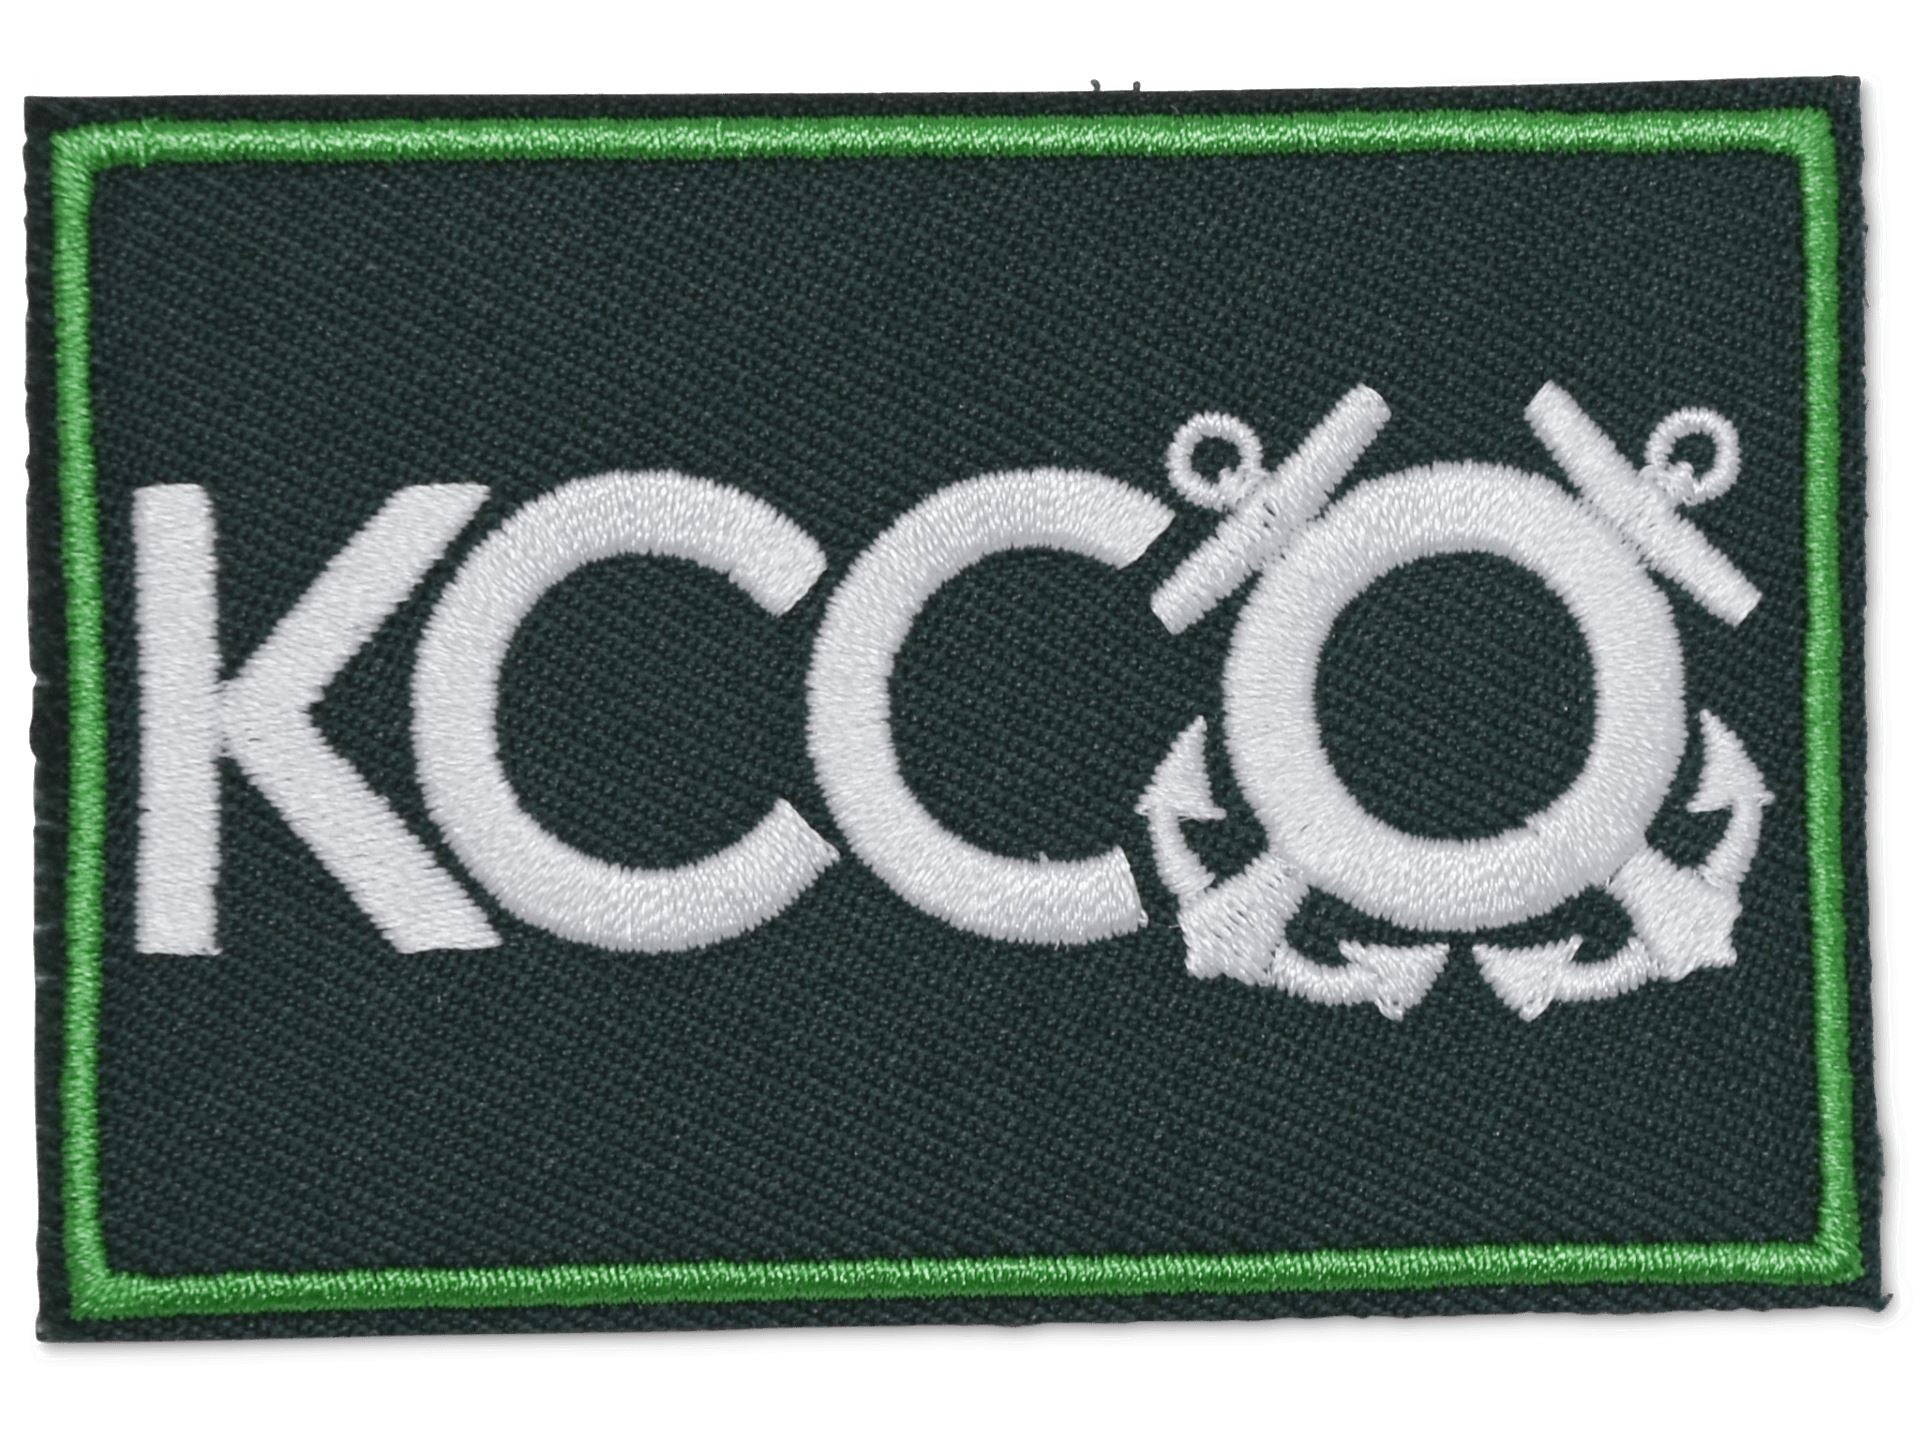 KCCO - Coastie On Embroidered Patch Morale Patch® Armory 